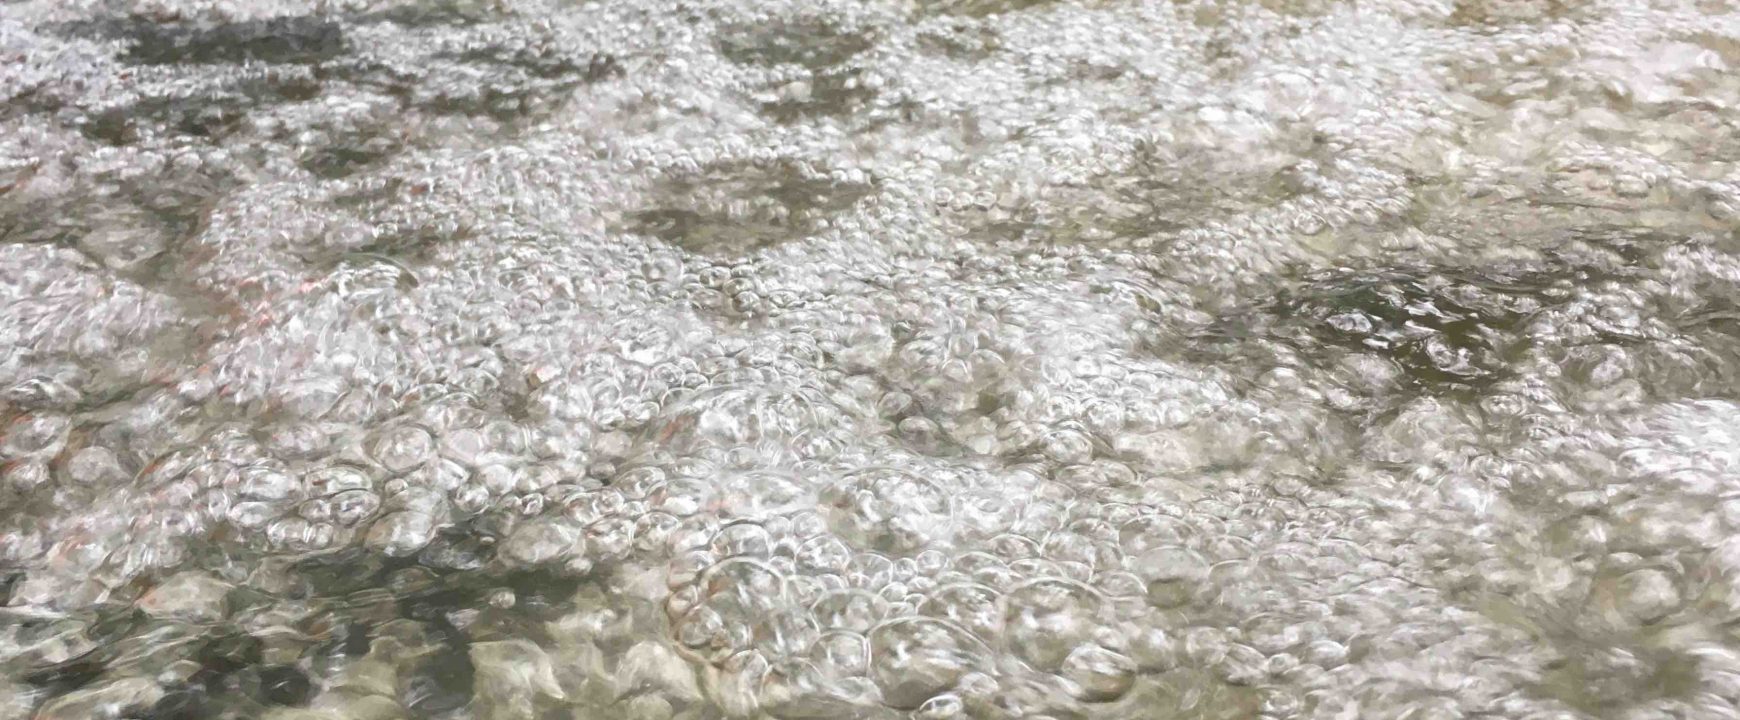 Bubbles breaking surface tension to form a barrier